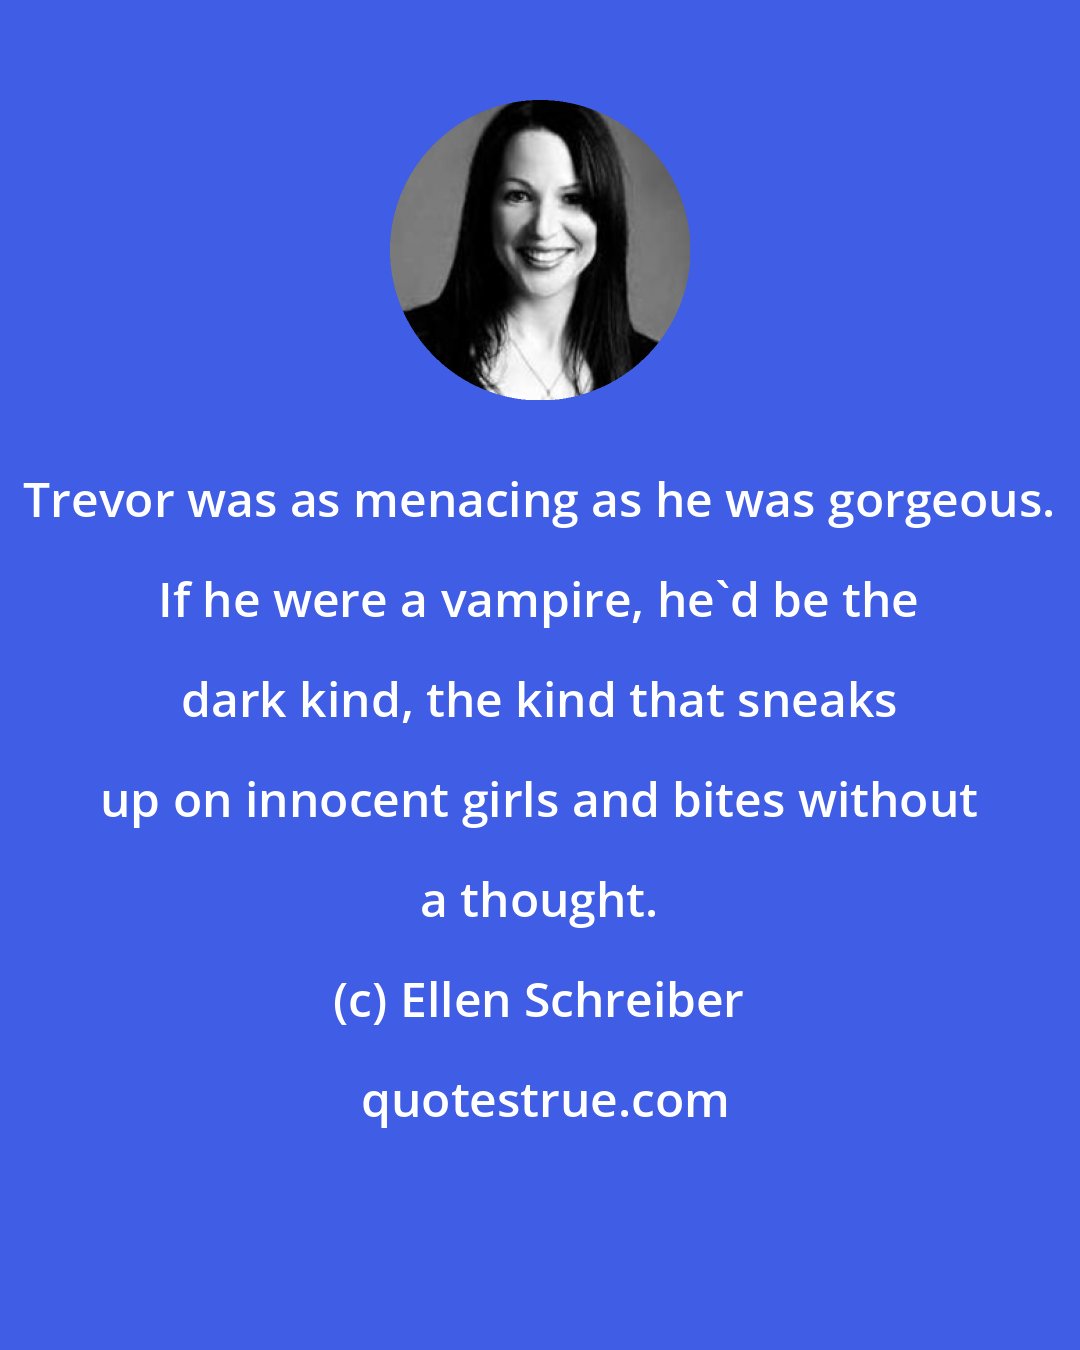 Ellen Schreiber: Trevor was as menacing as he was gorgeous. If he were a vampire, he'd be the dark kind, the kind that sneaks up on innocent girls and bites without a thought.